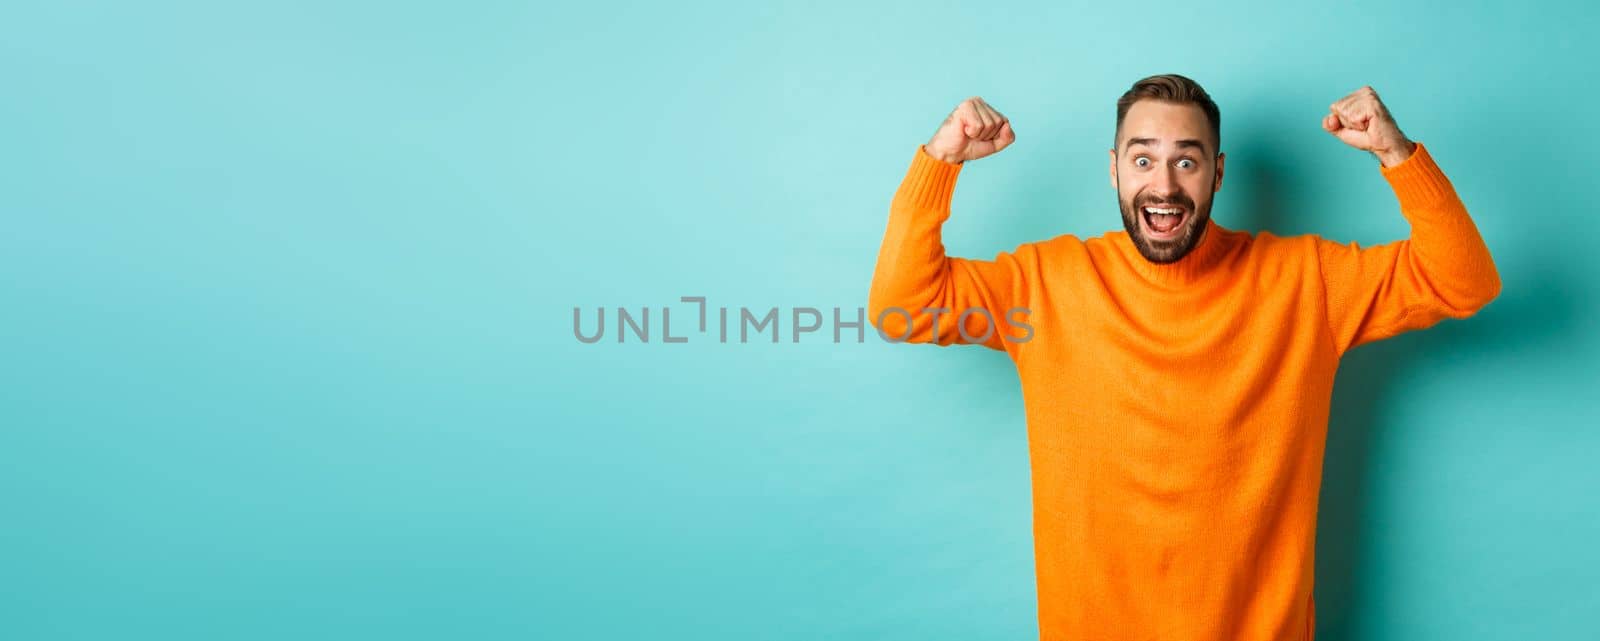 Handsome man celebrating victory, winning and looking happy, triumphing over win, standing over light blue background.